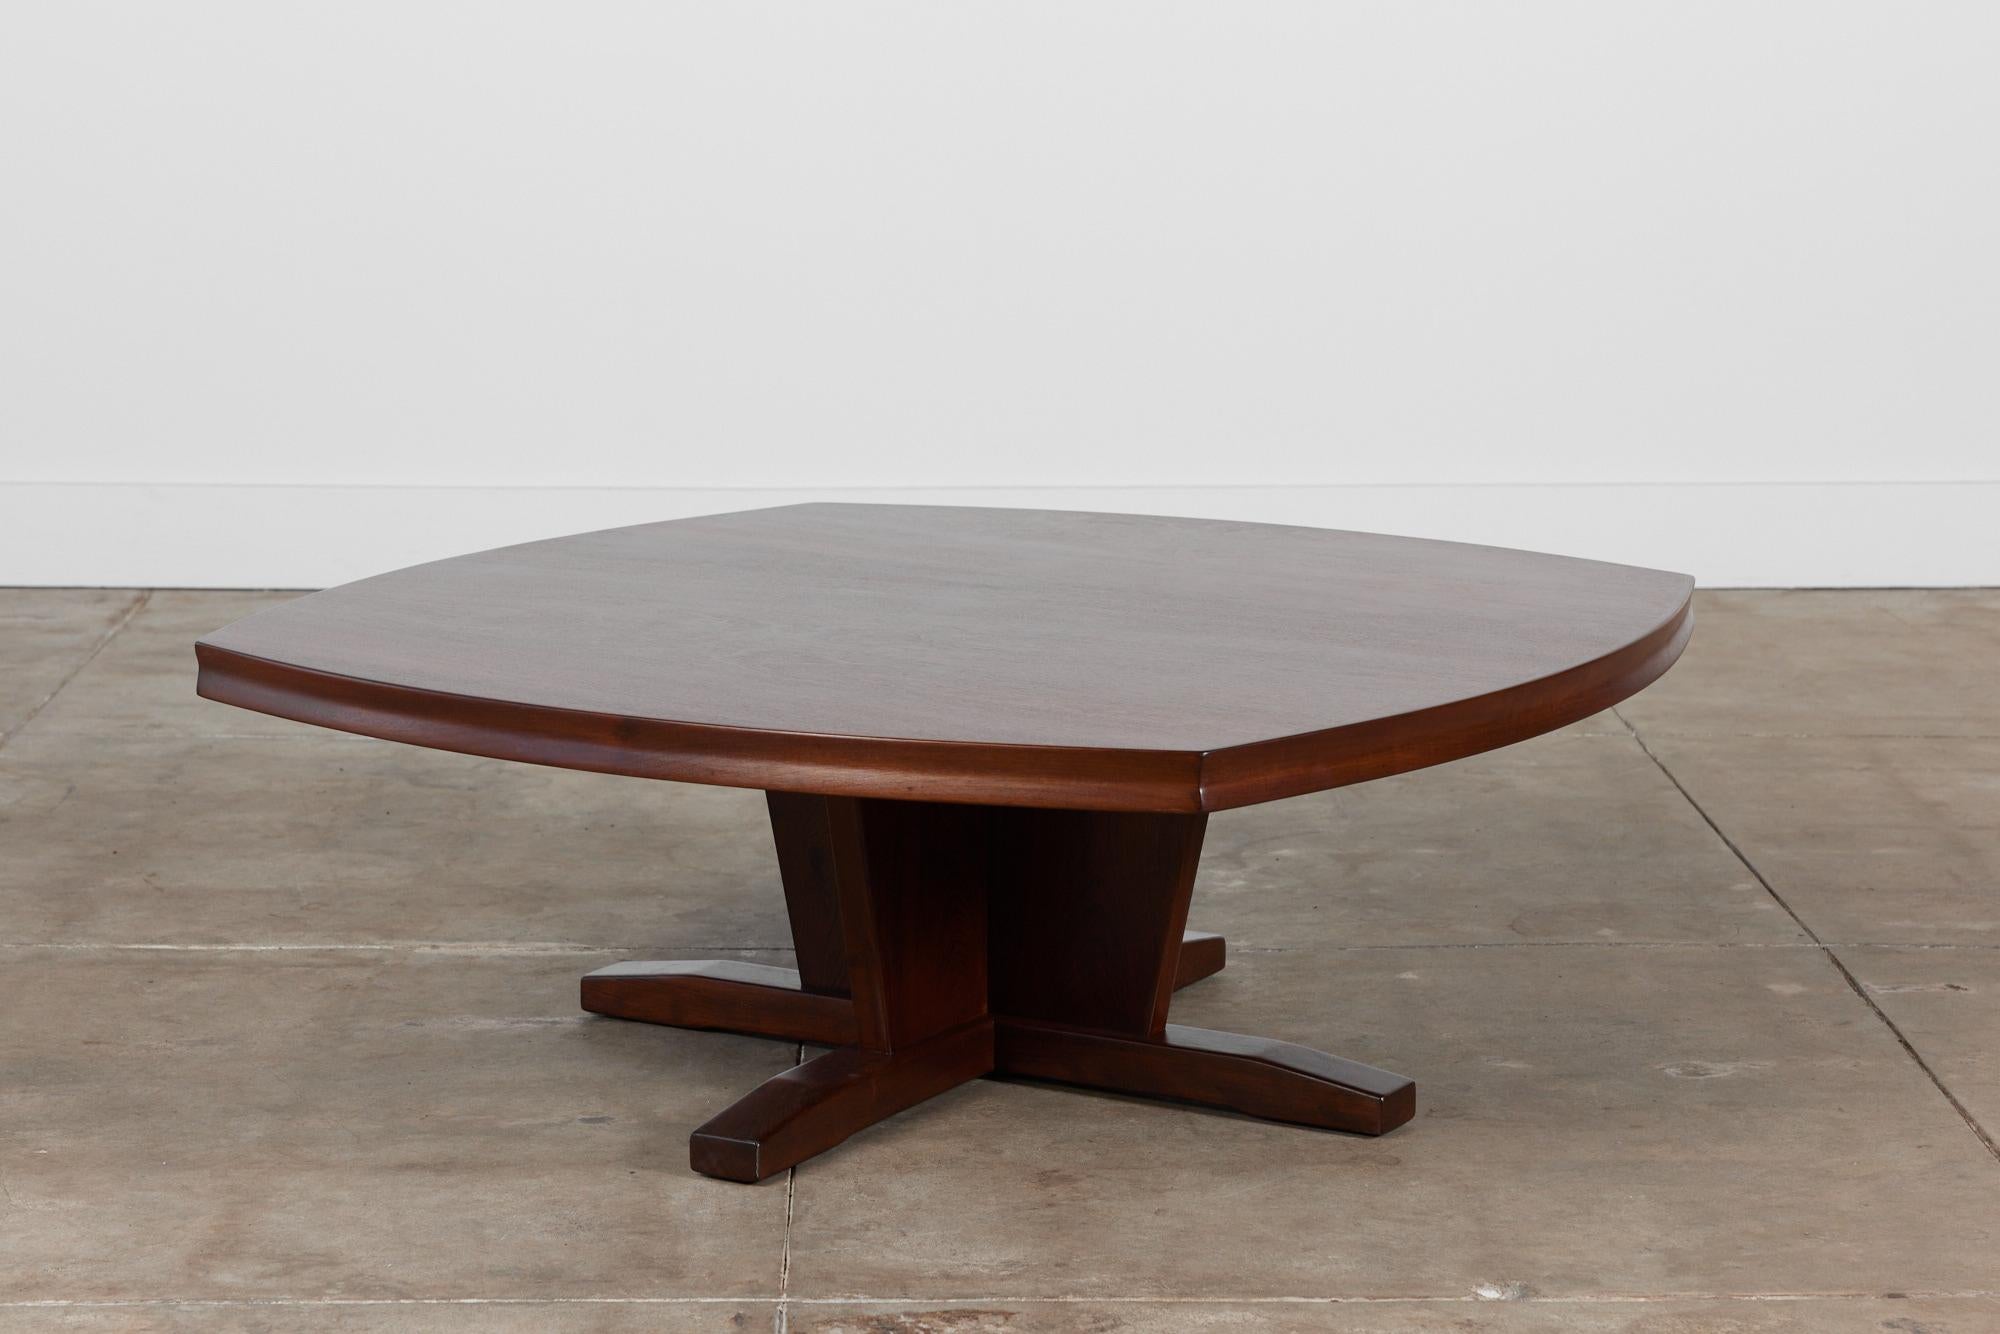 Coffee table in the style of acclaimed midcentury designer George Nakashima. This example is made of walnut and features a square table top with rounded sides. The table has a soft divot that extends around the outer rim of the table top. It is